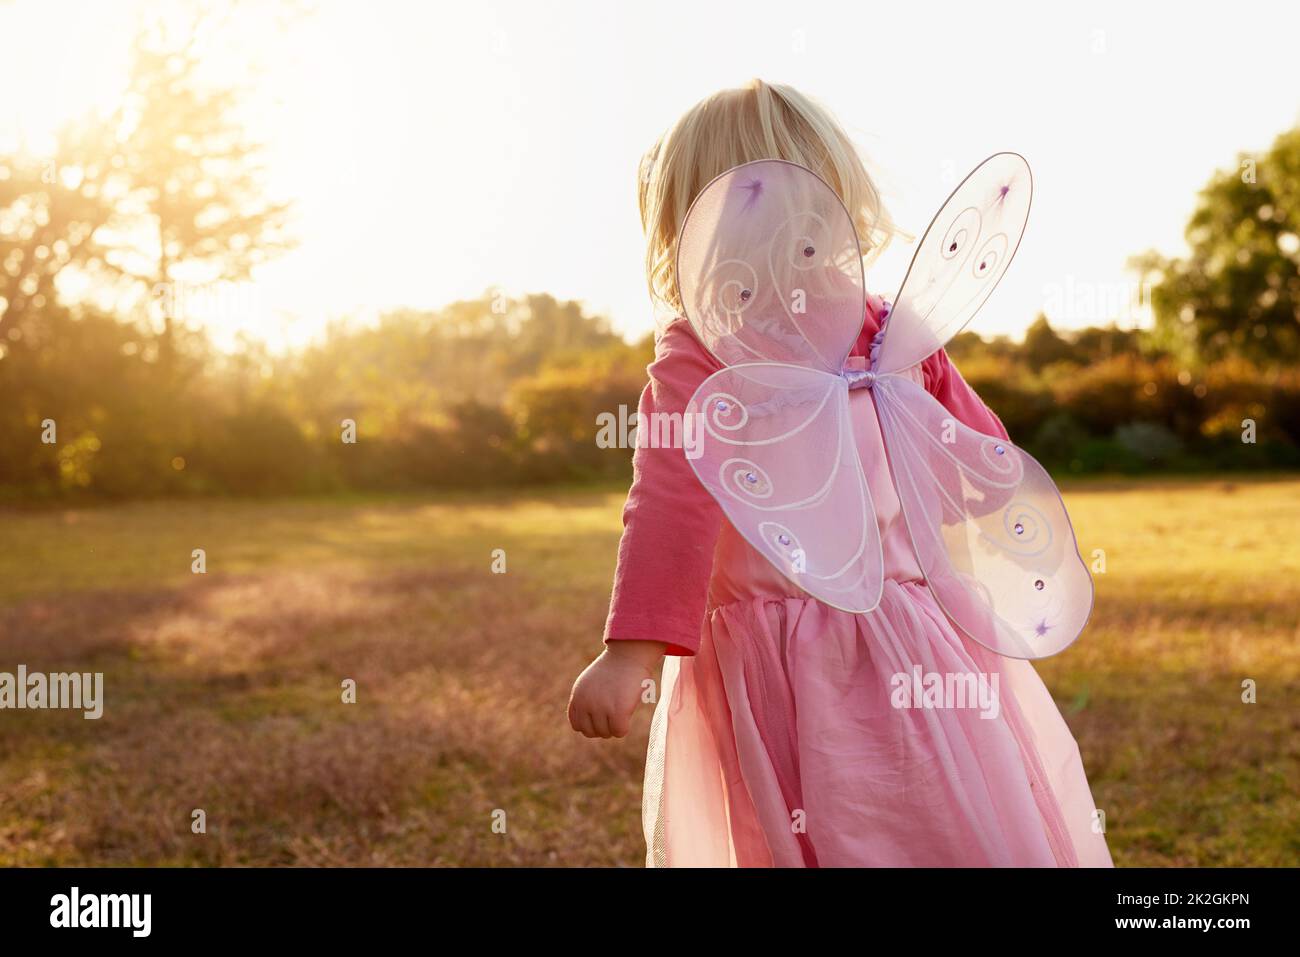 Children explore the world through the power of their imagination. Rear view shot of a little girl dressed up as a fairy enjoying the day outside. Stock Photo